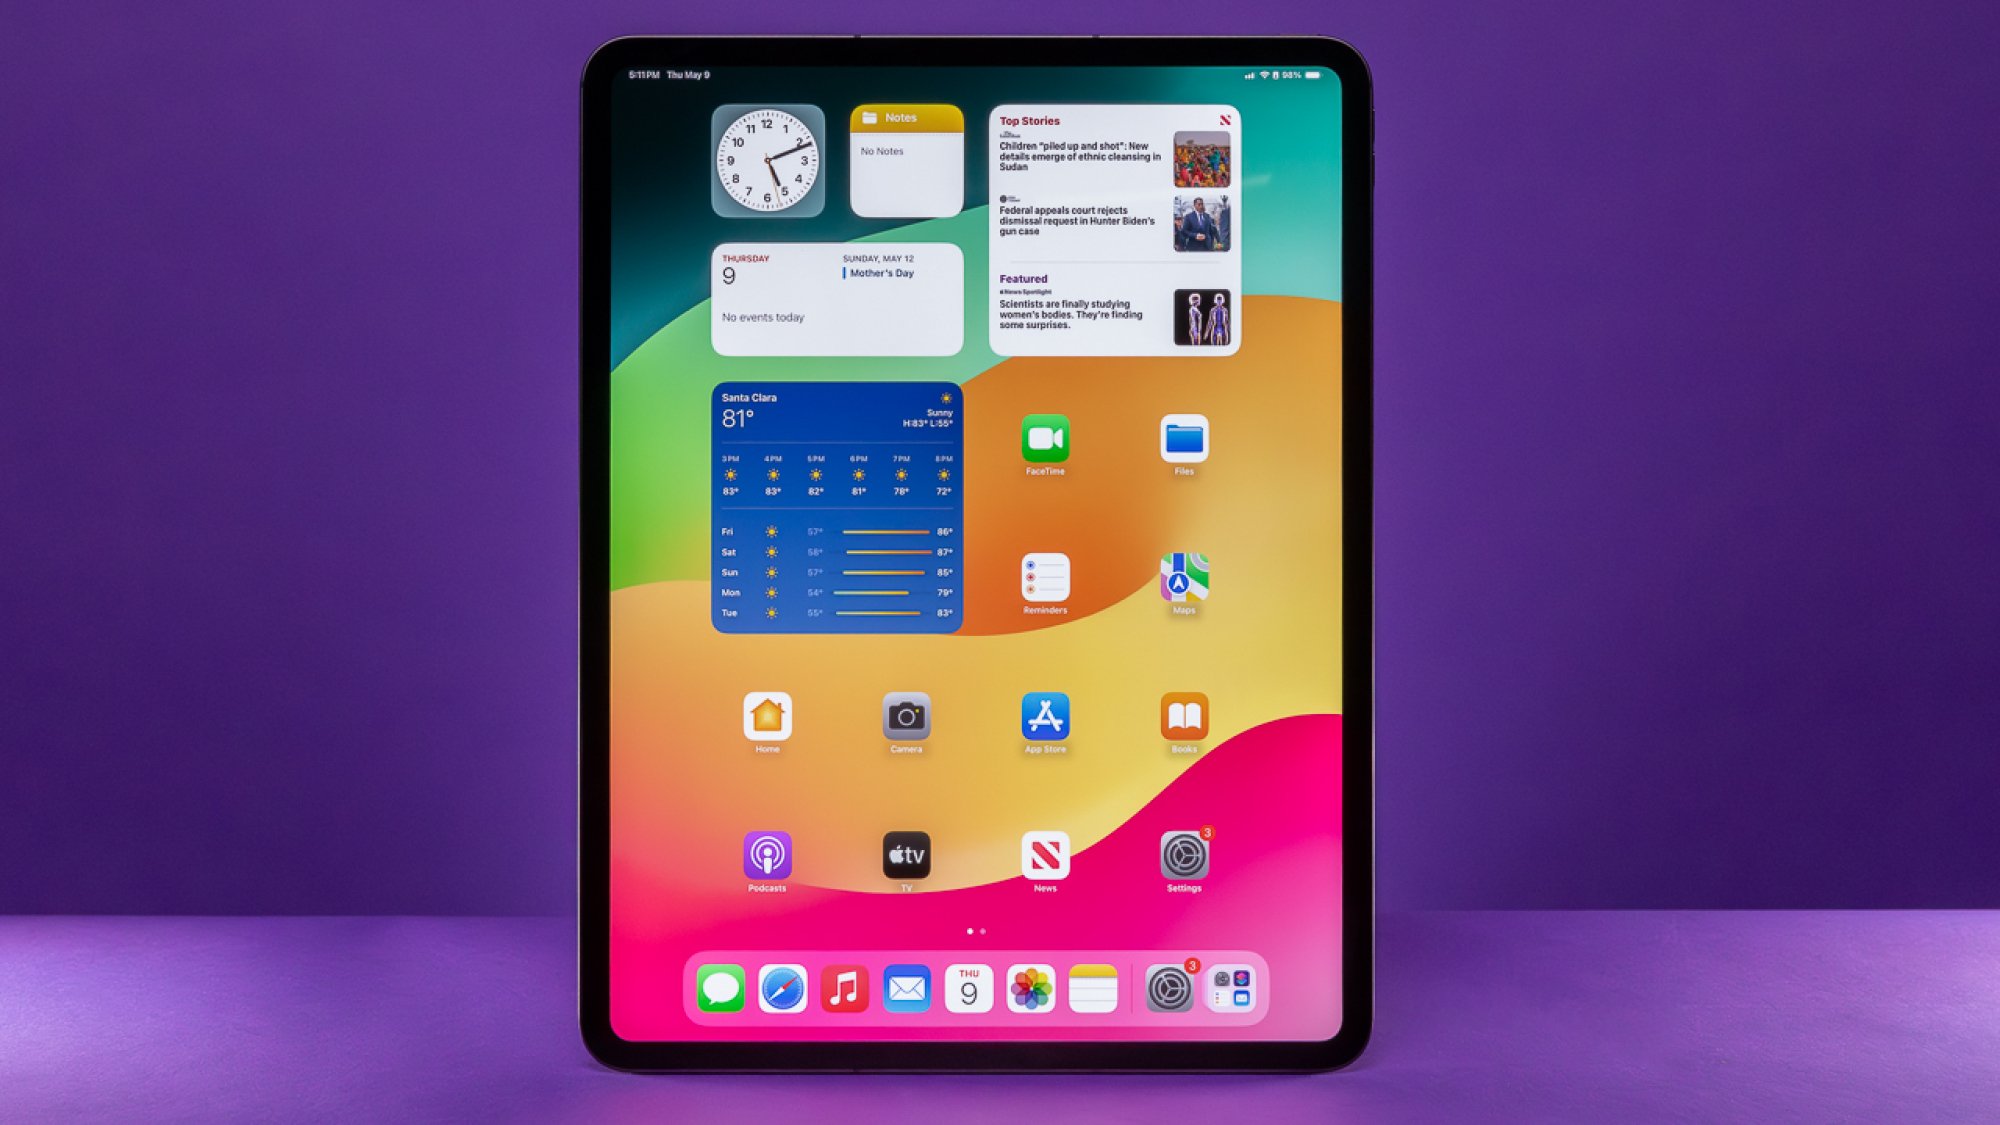 13-inch iPad Pro in front of a purple background in portrait mode